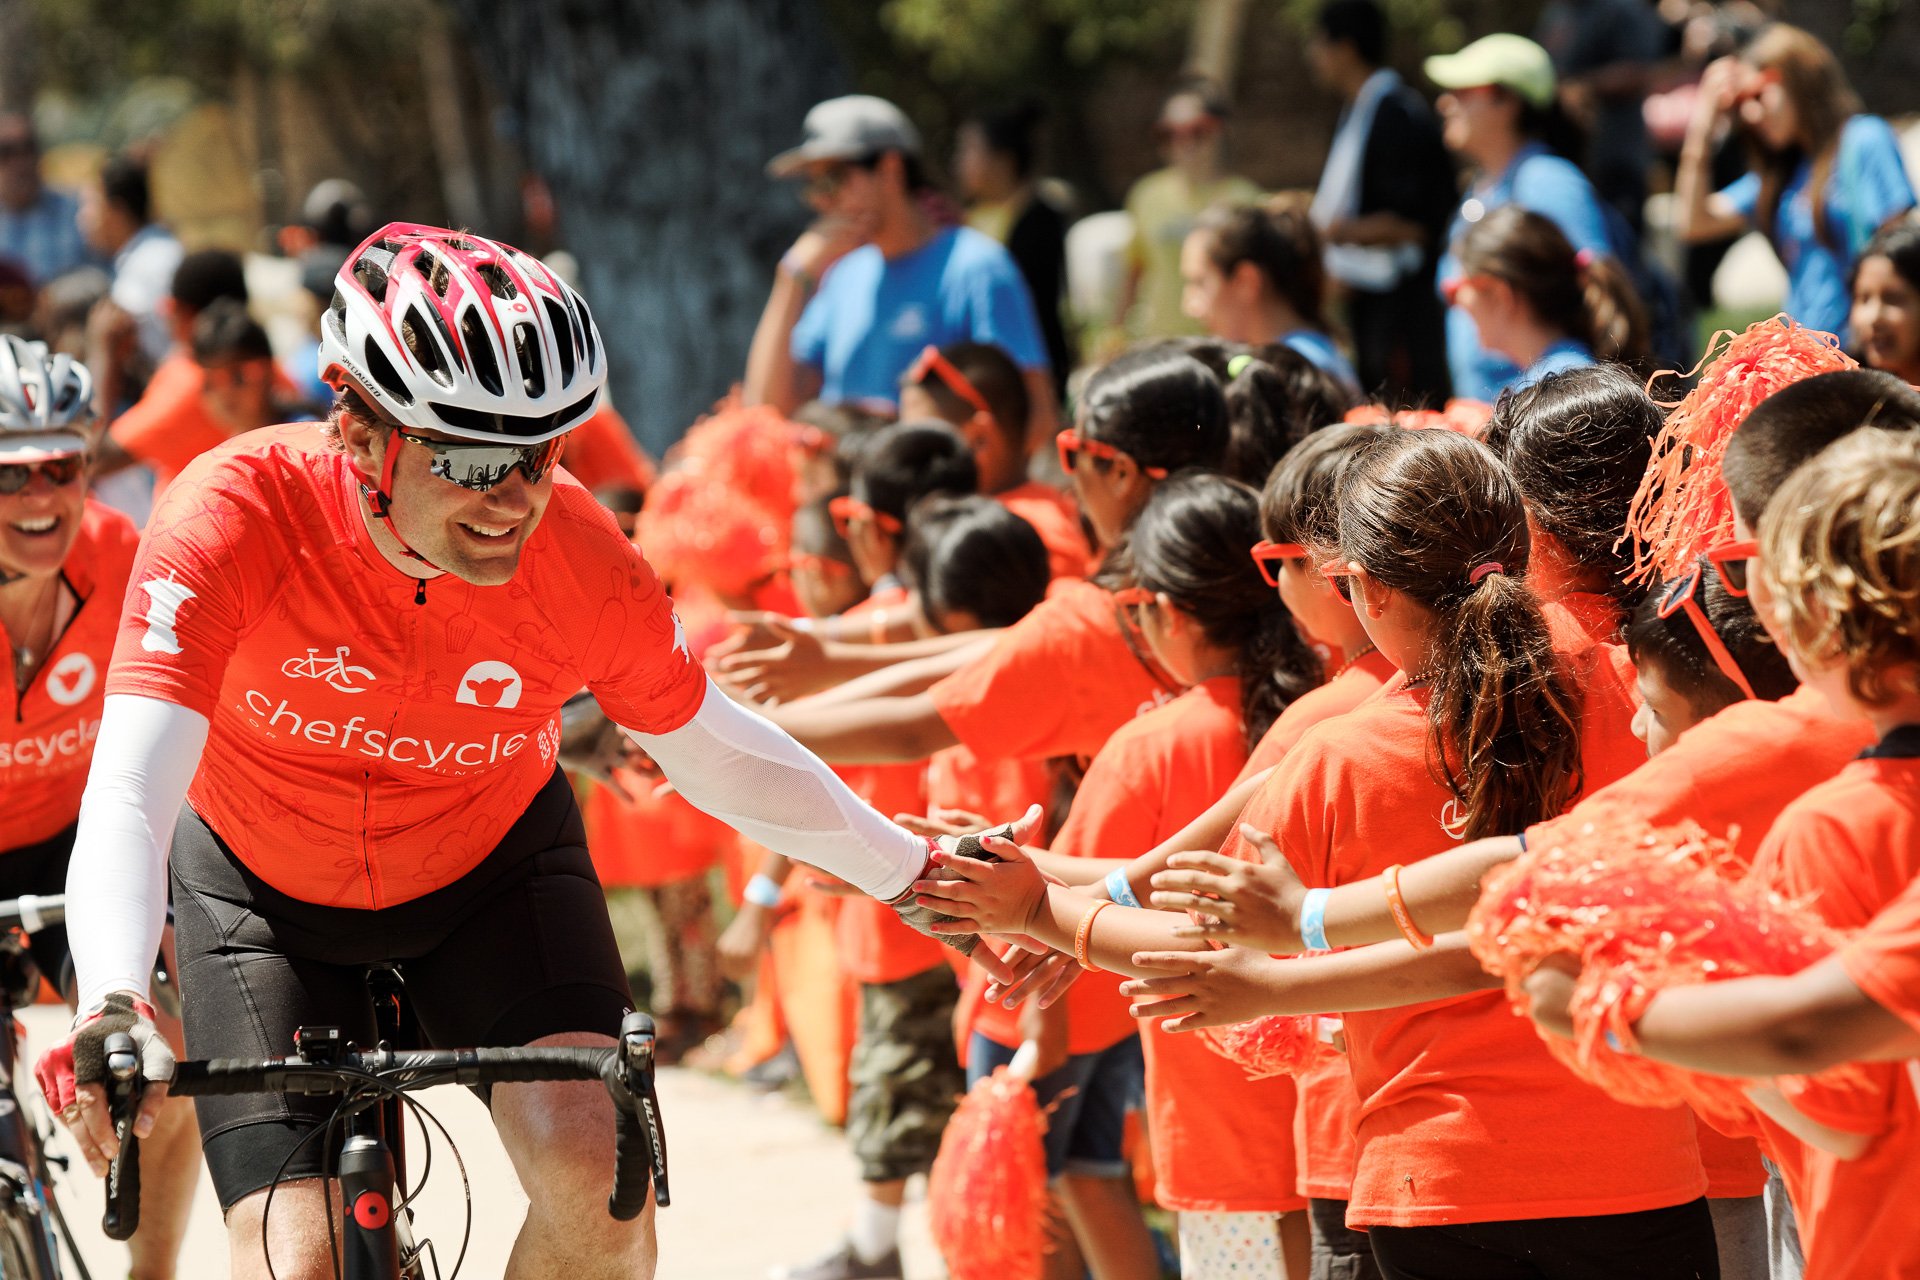 High-fives at the end of the race. (Photo by No Kid Hungry)